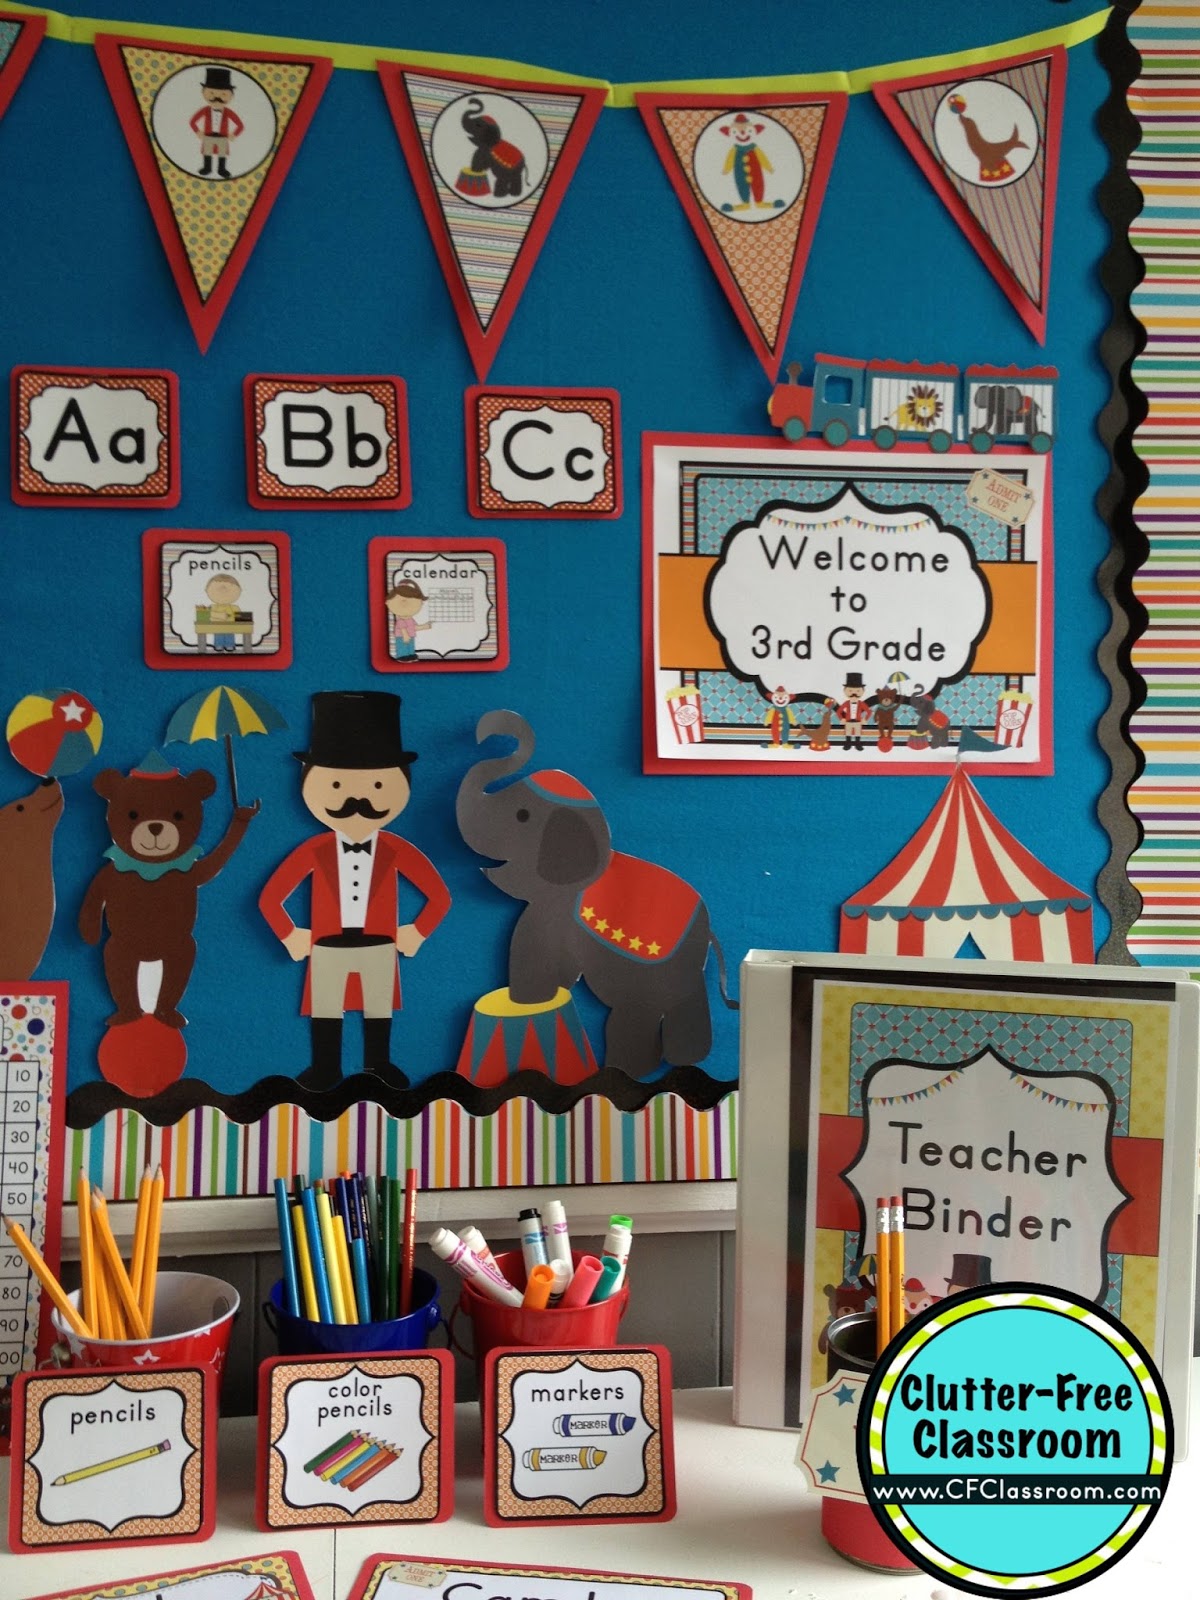 Are you planning an circus themed classroom or thematic unit? This blog post provides great decoration tips and ideas for the best circus theme yet! It has photos, ideas, supplies & printable classroom decor to will make set up easy and affordable. You can create an circus theme on a budget!